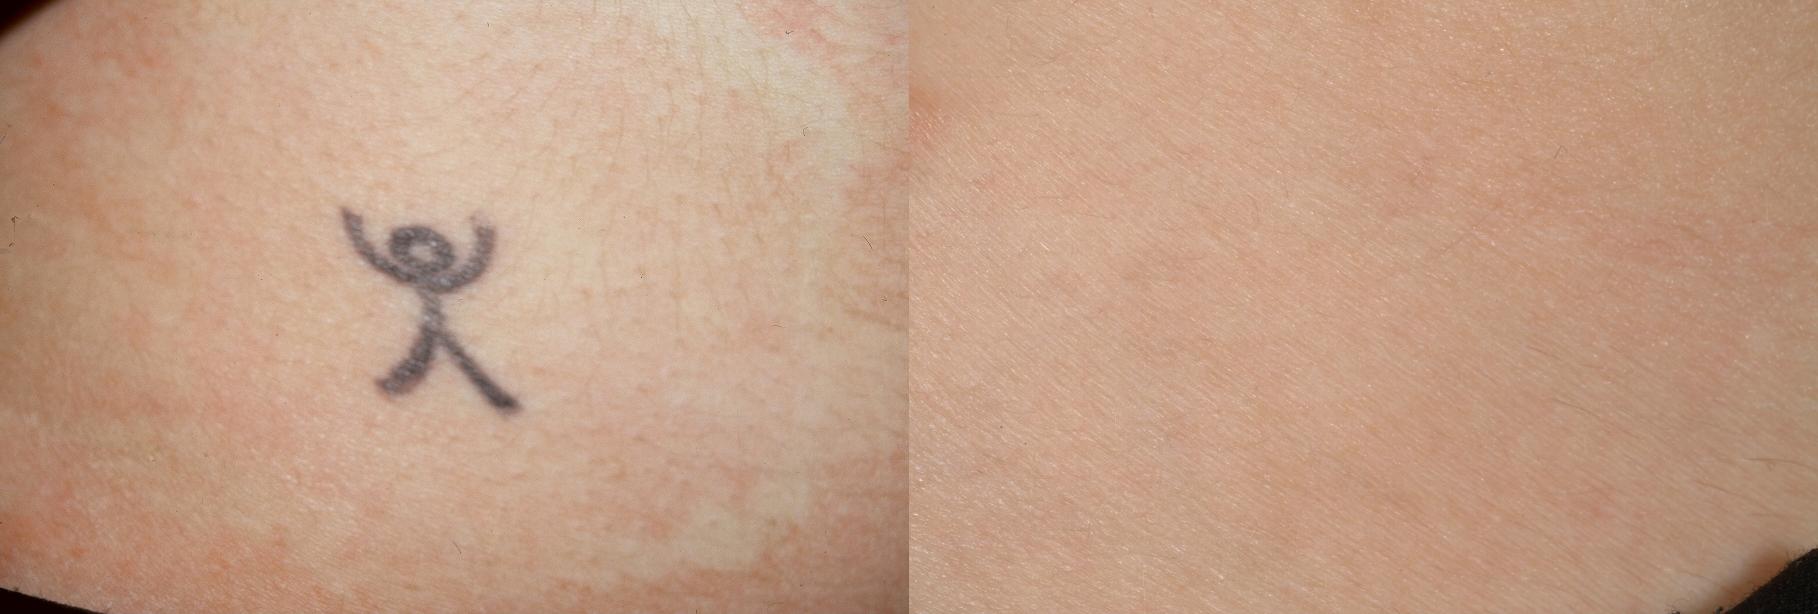 Laser Tattoo Removal What You Need To Know To Get Started